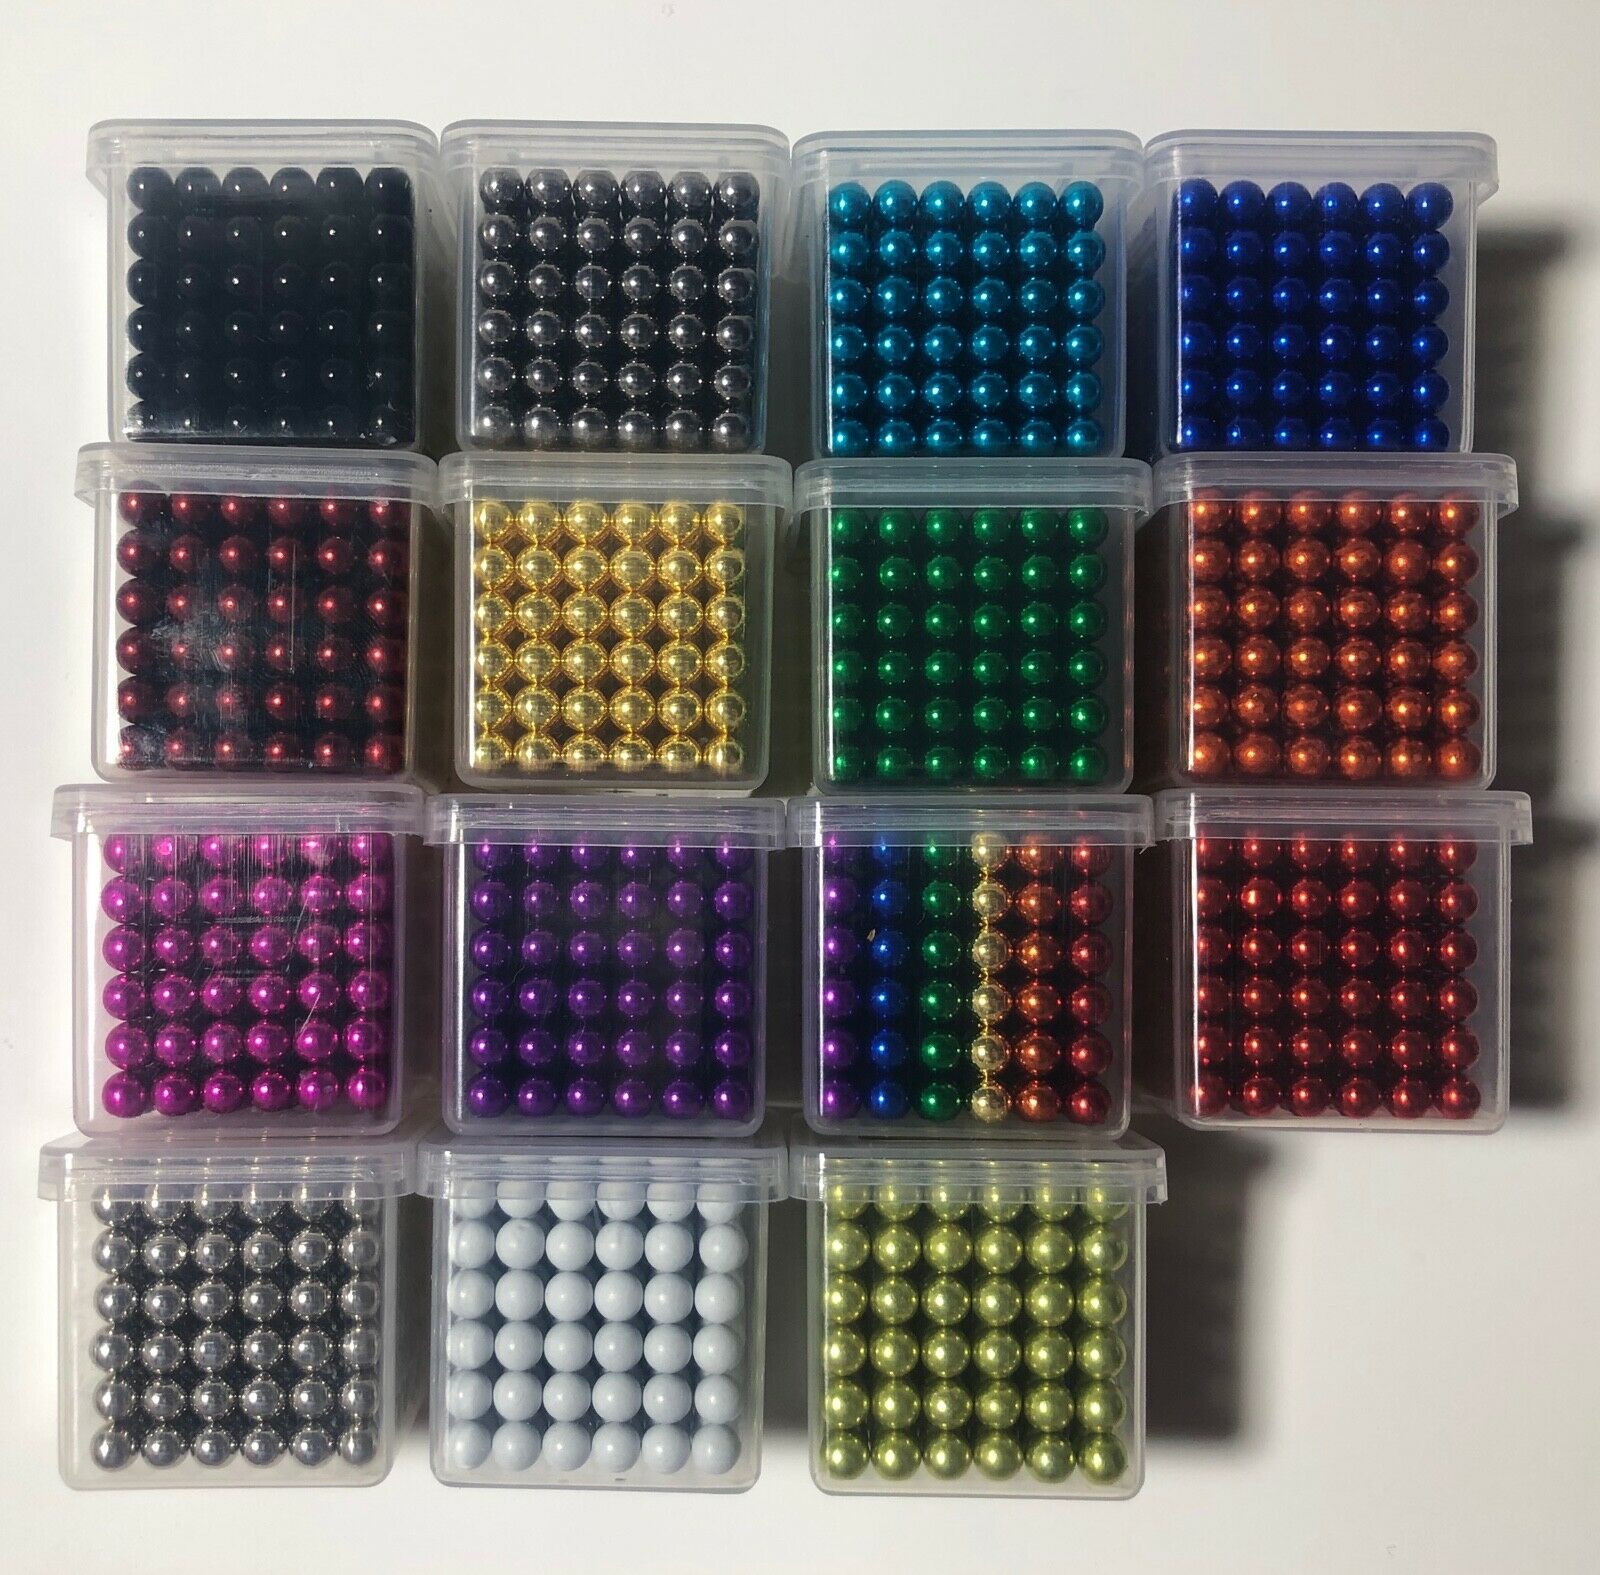 216 Neodymium Balls 5mm (1/5") - Stable Magnets - Accumulate The Color